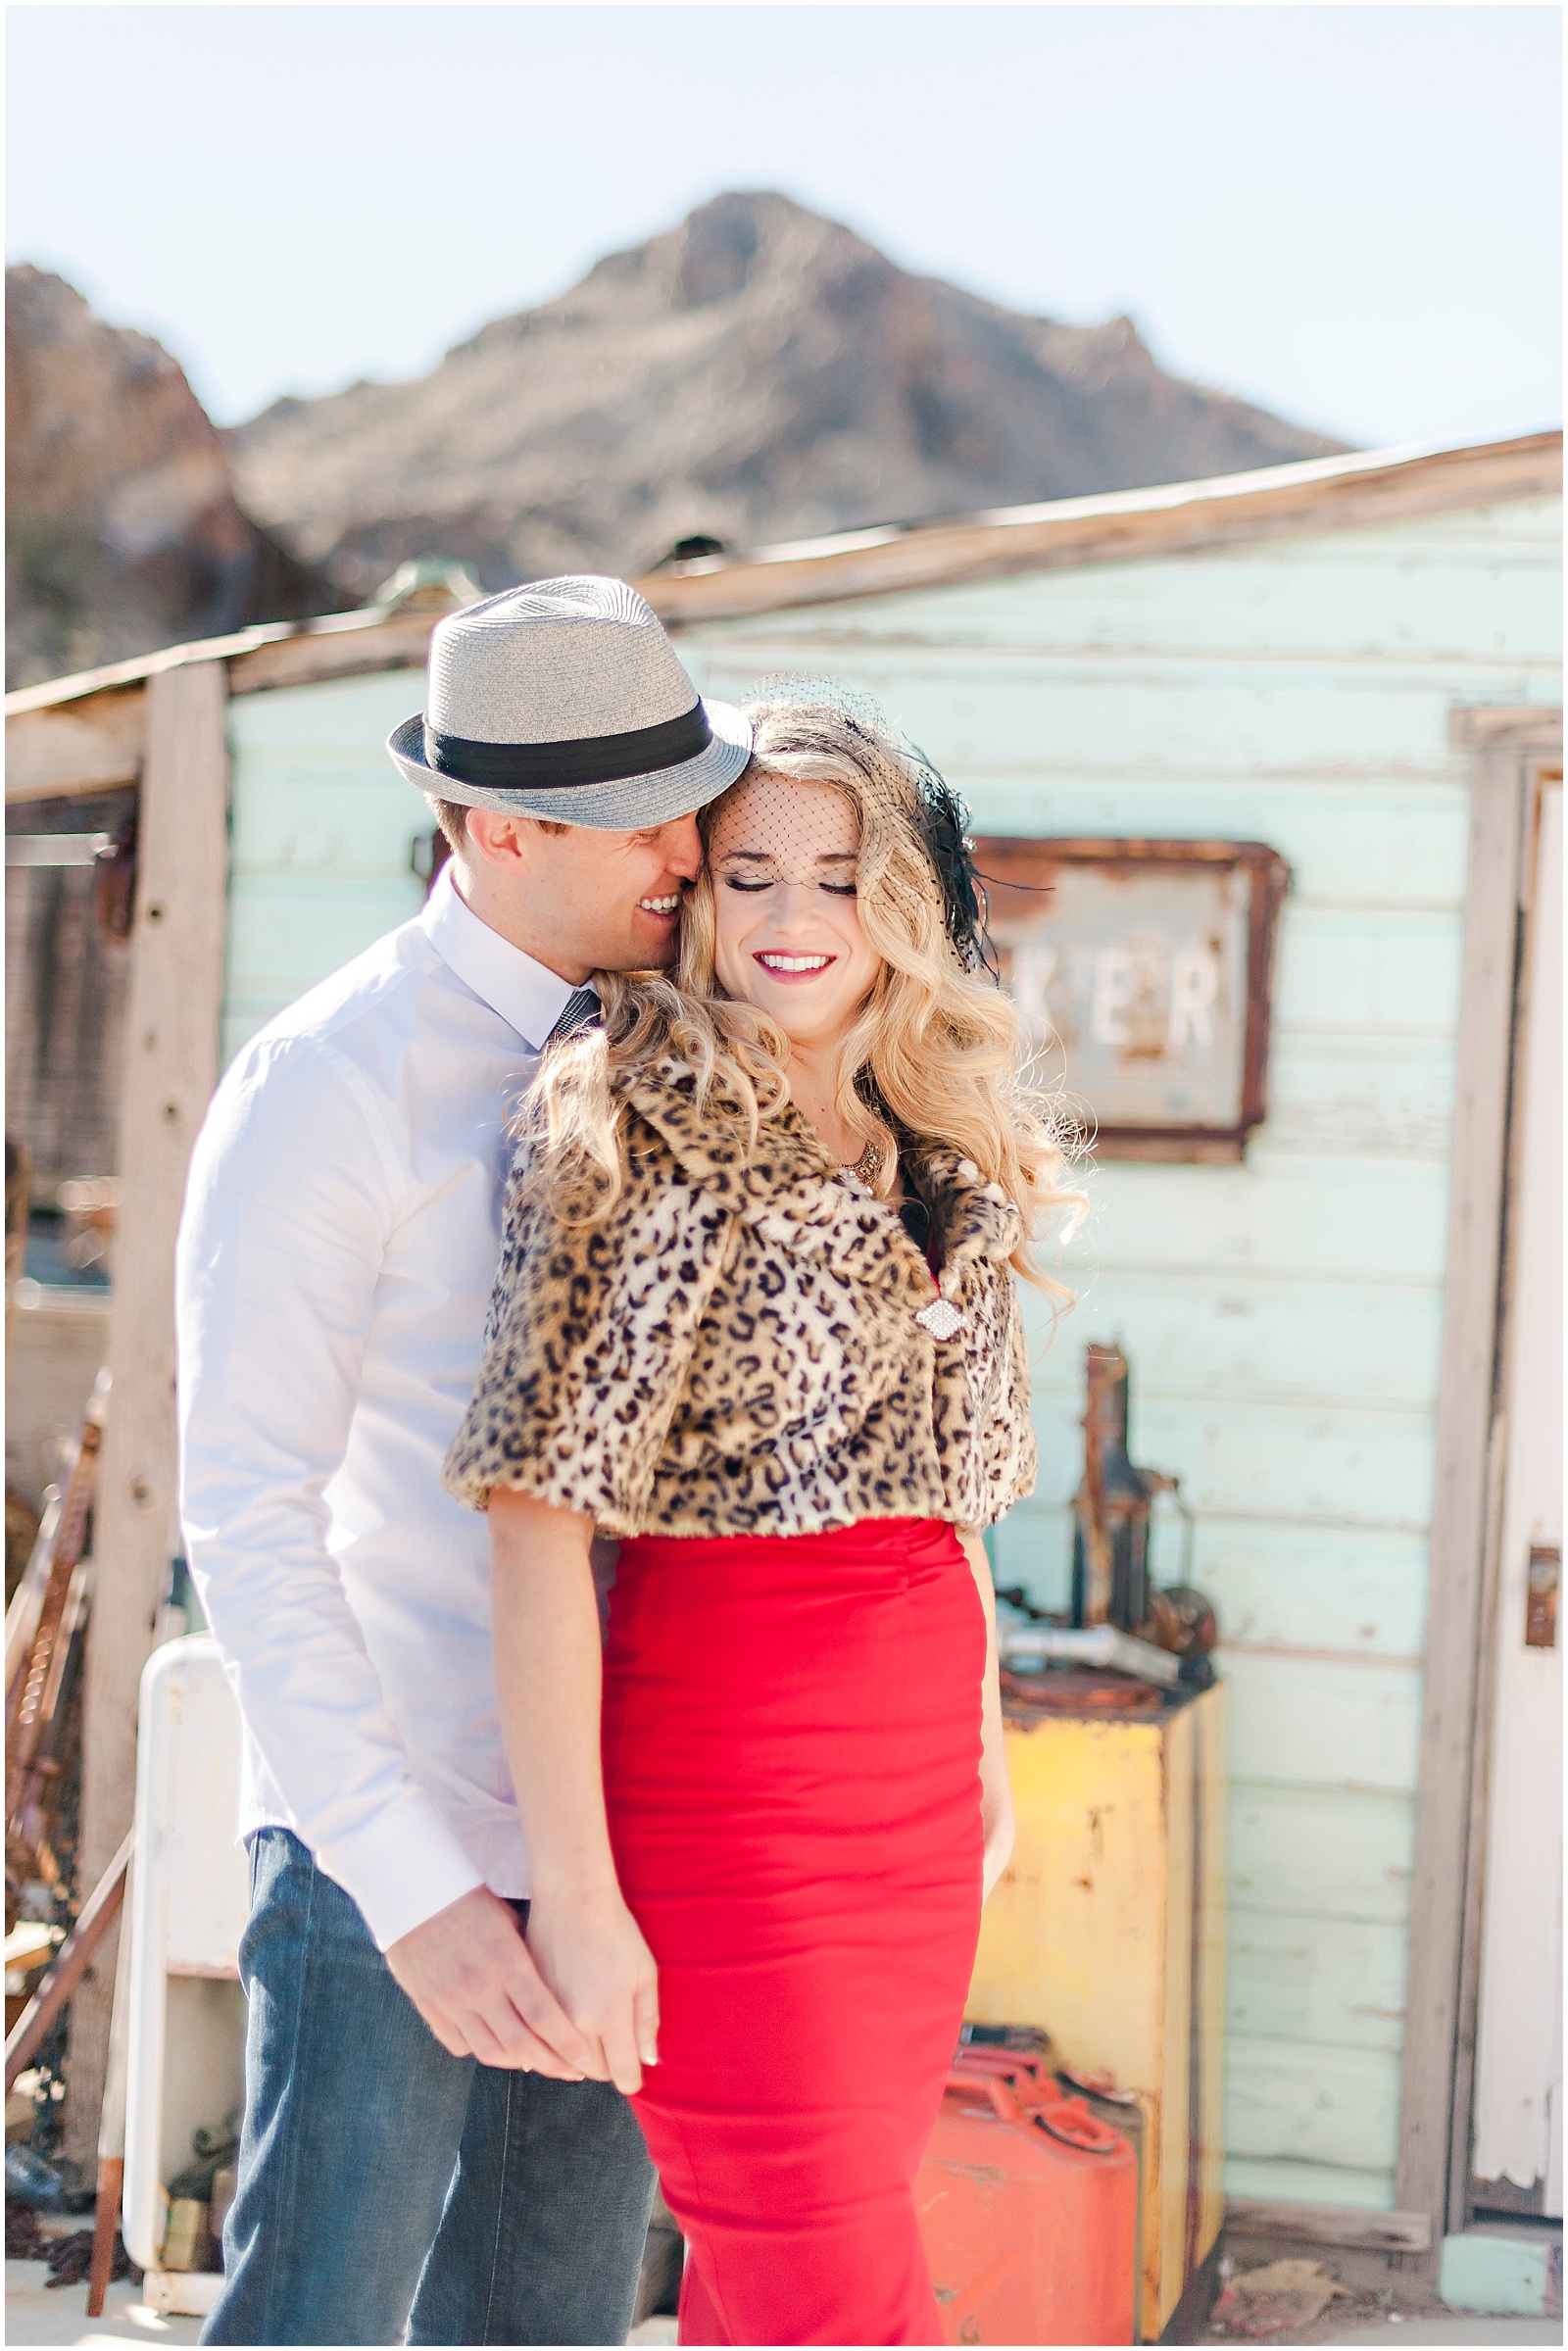 El Dorado Canyon Mine in Las Vegas Engagement Session. Photography by Mollie Jane Photography. To see more go to www.molliejanephotography.com